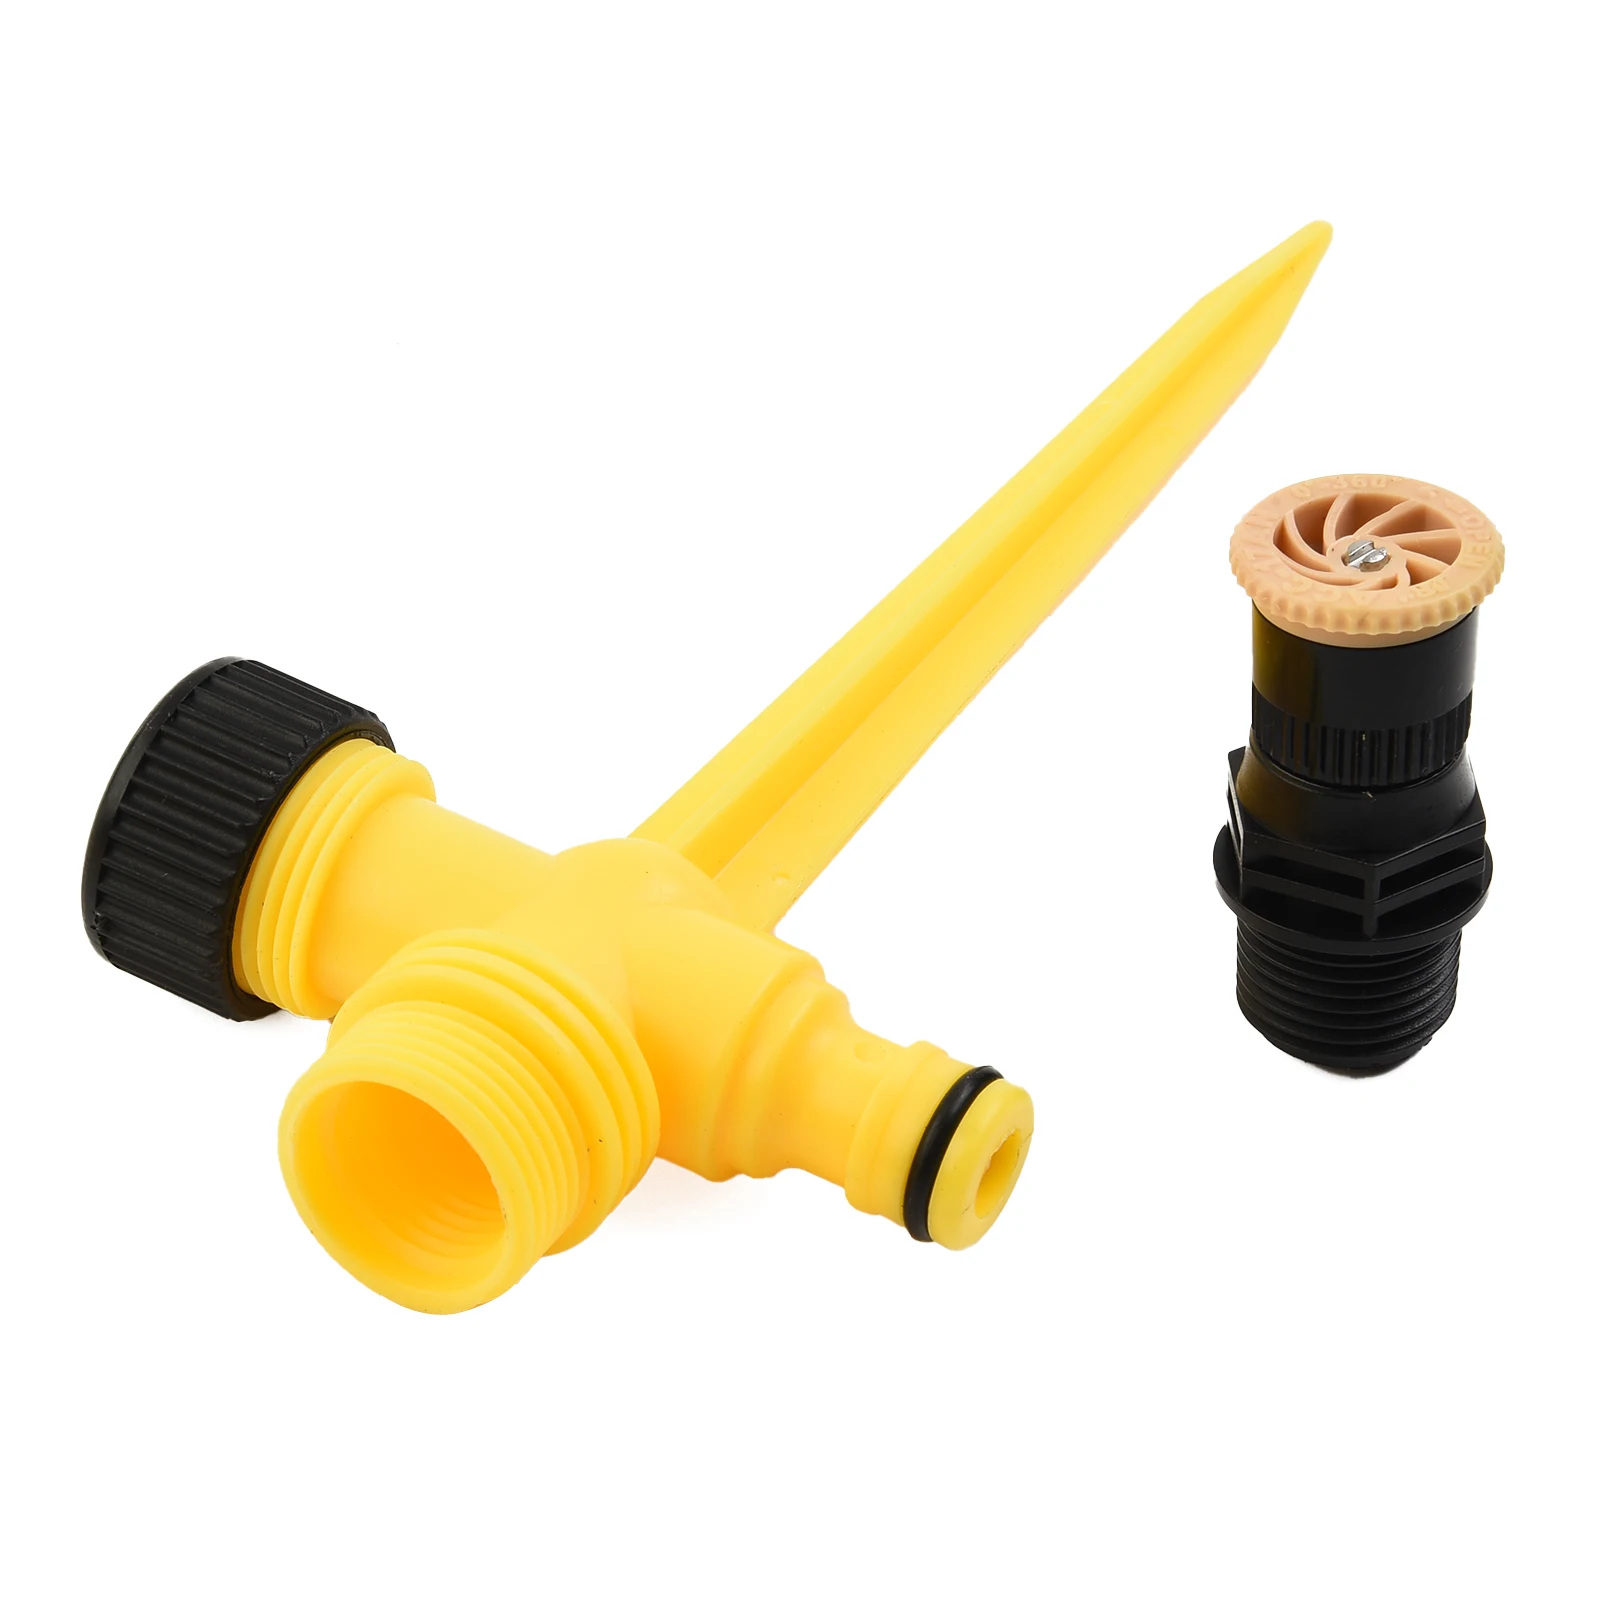 

1/2/4pcs 360° Rotating Jet Sprinklers Nozzle Auto Irrigation System Patio Save Water Garden Lawn Sprinkler Heads